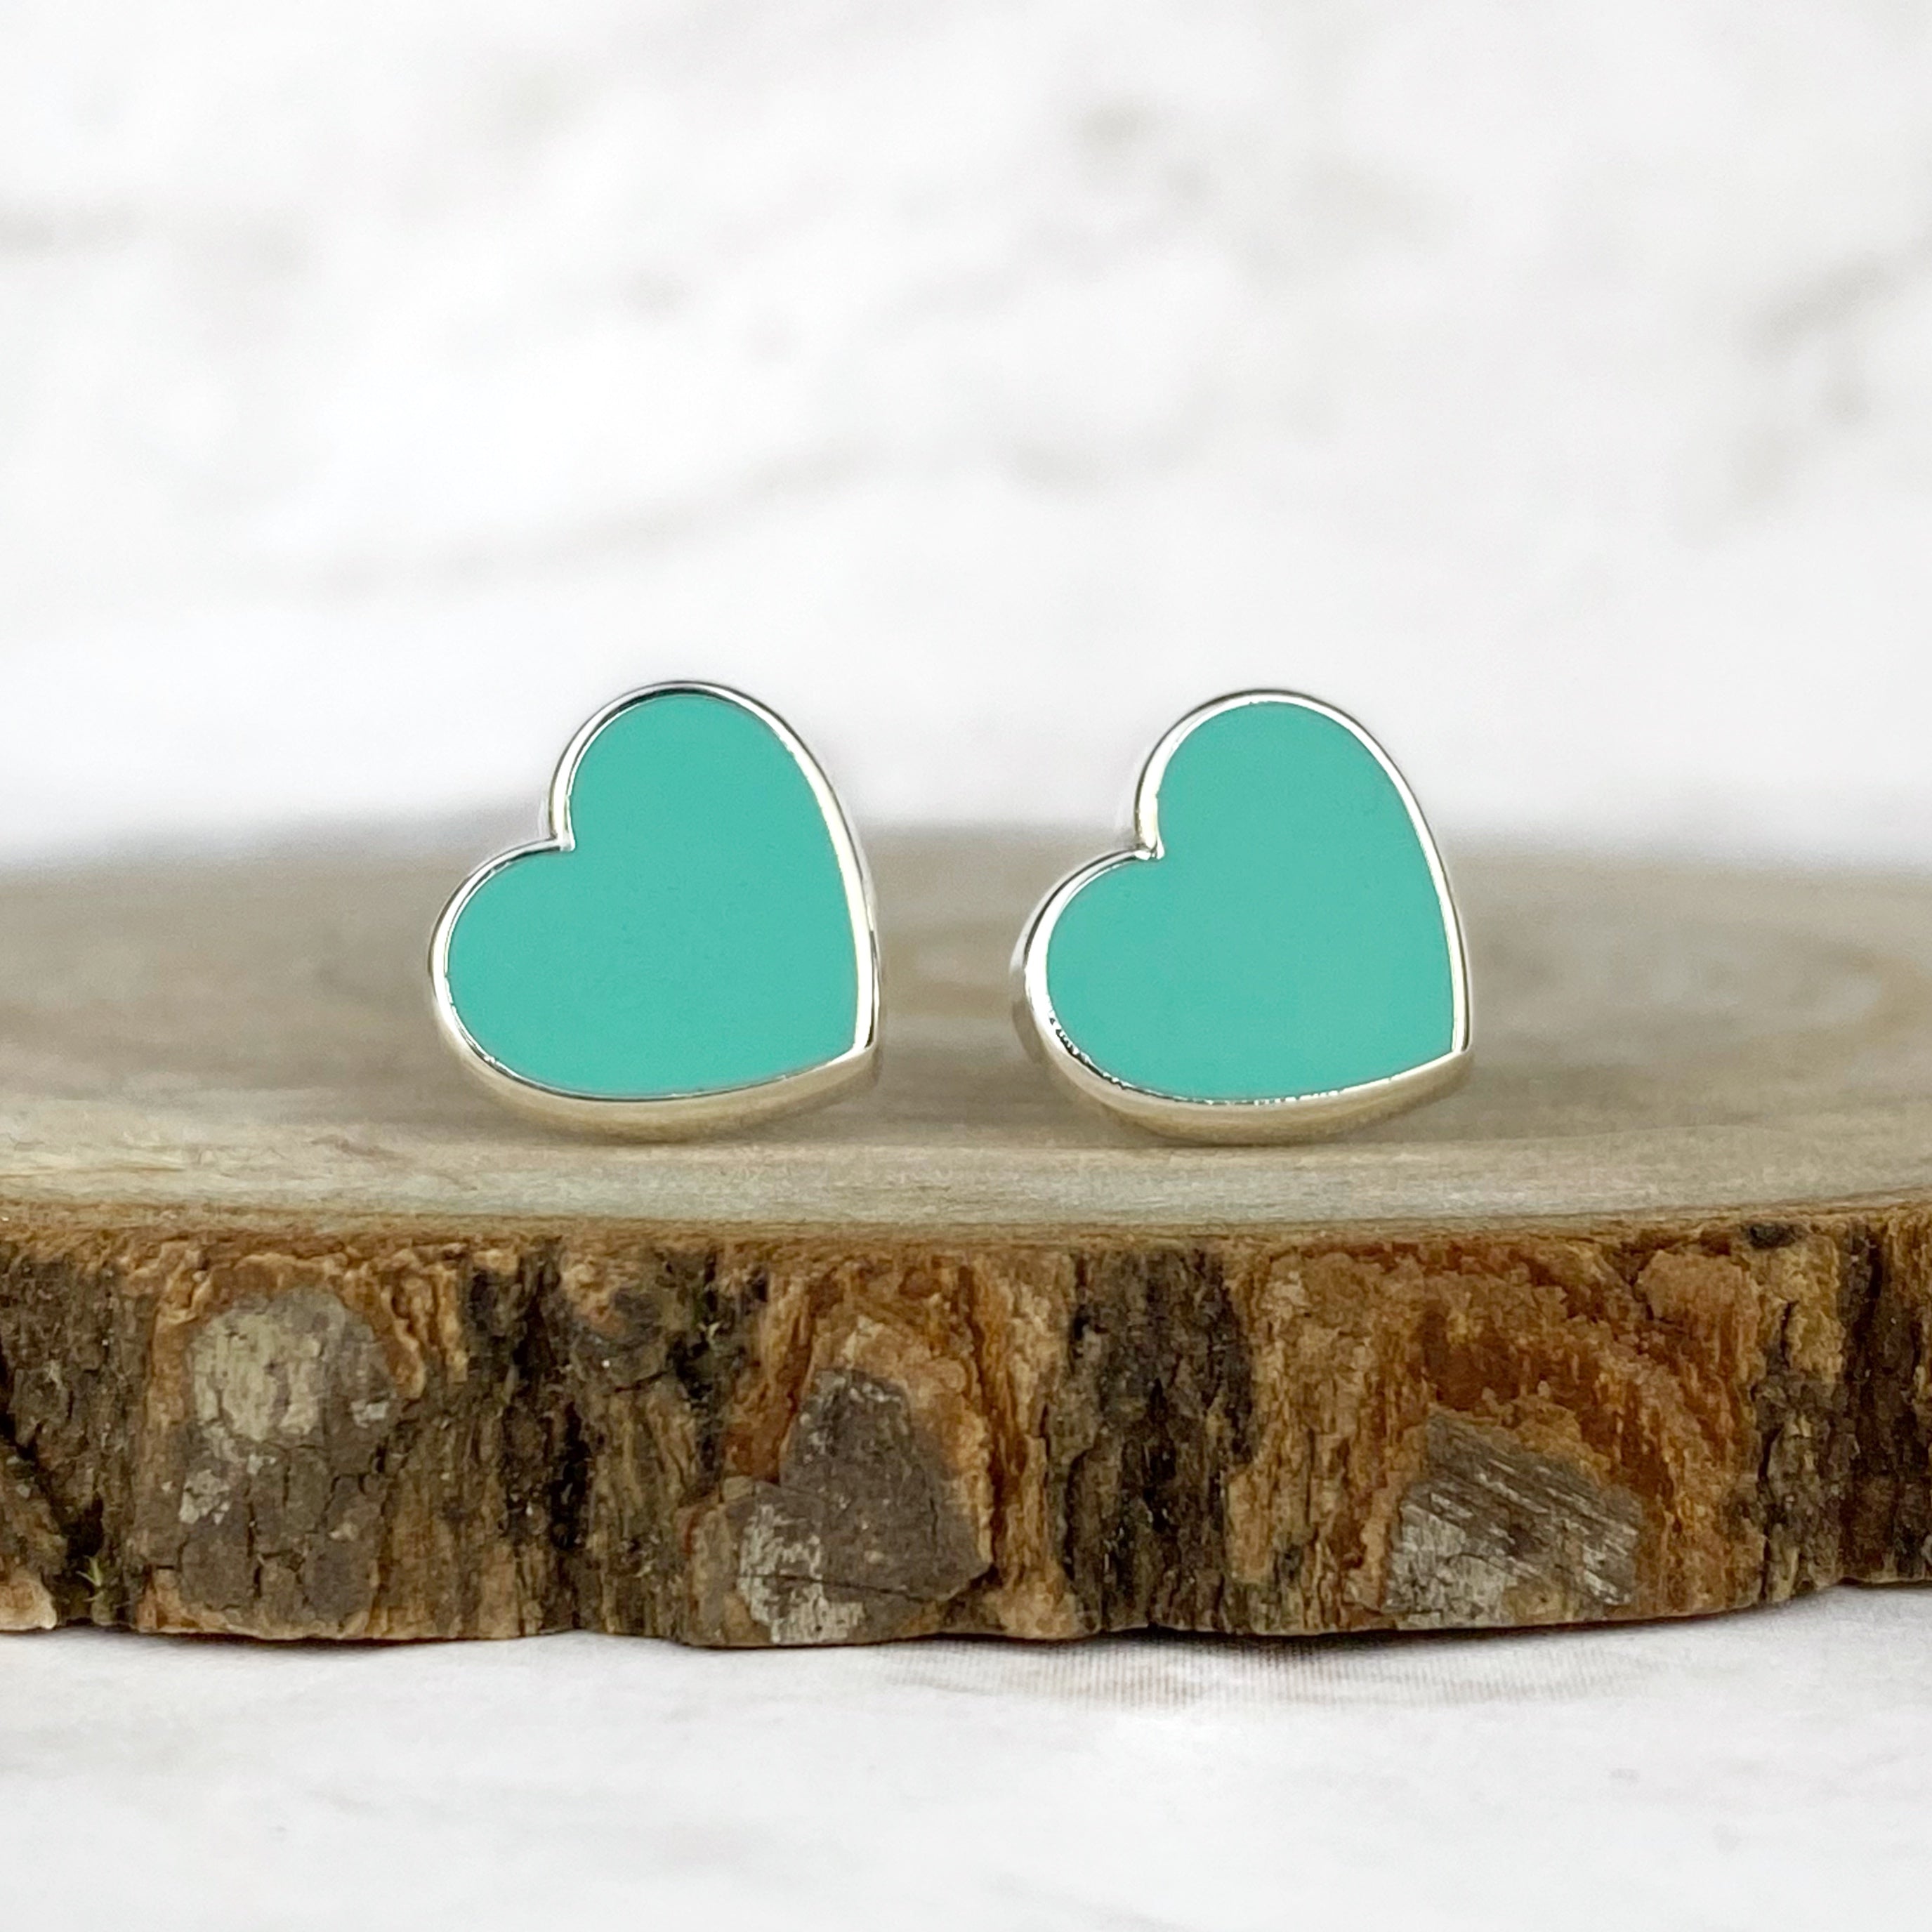 Earrings - Couture Blue Heart